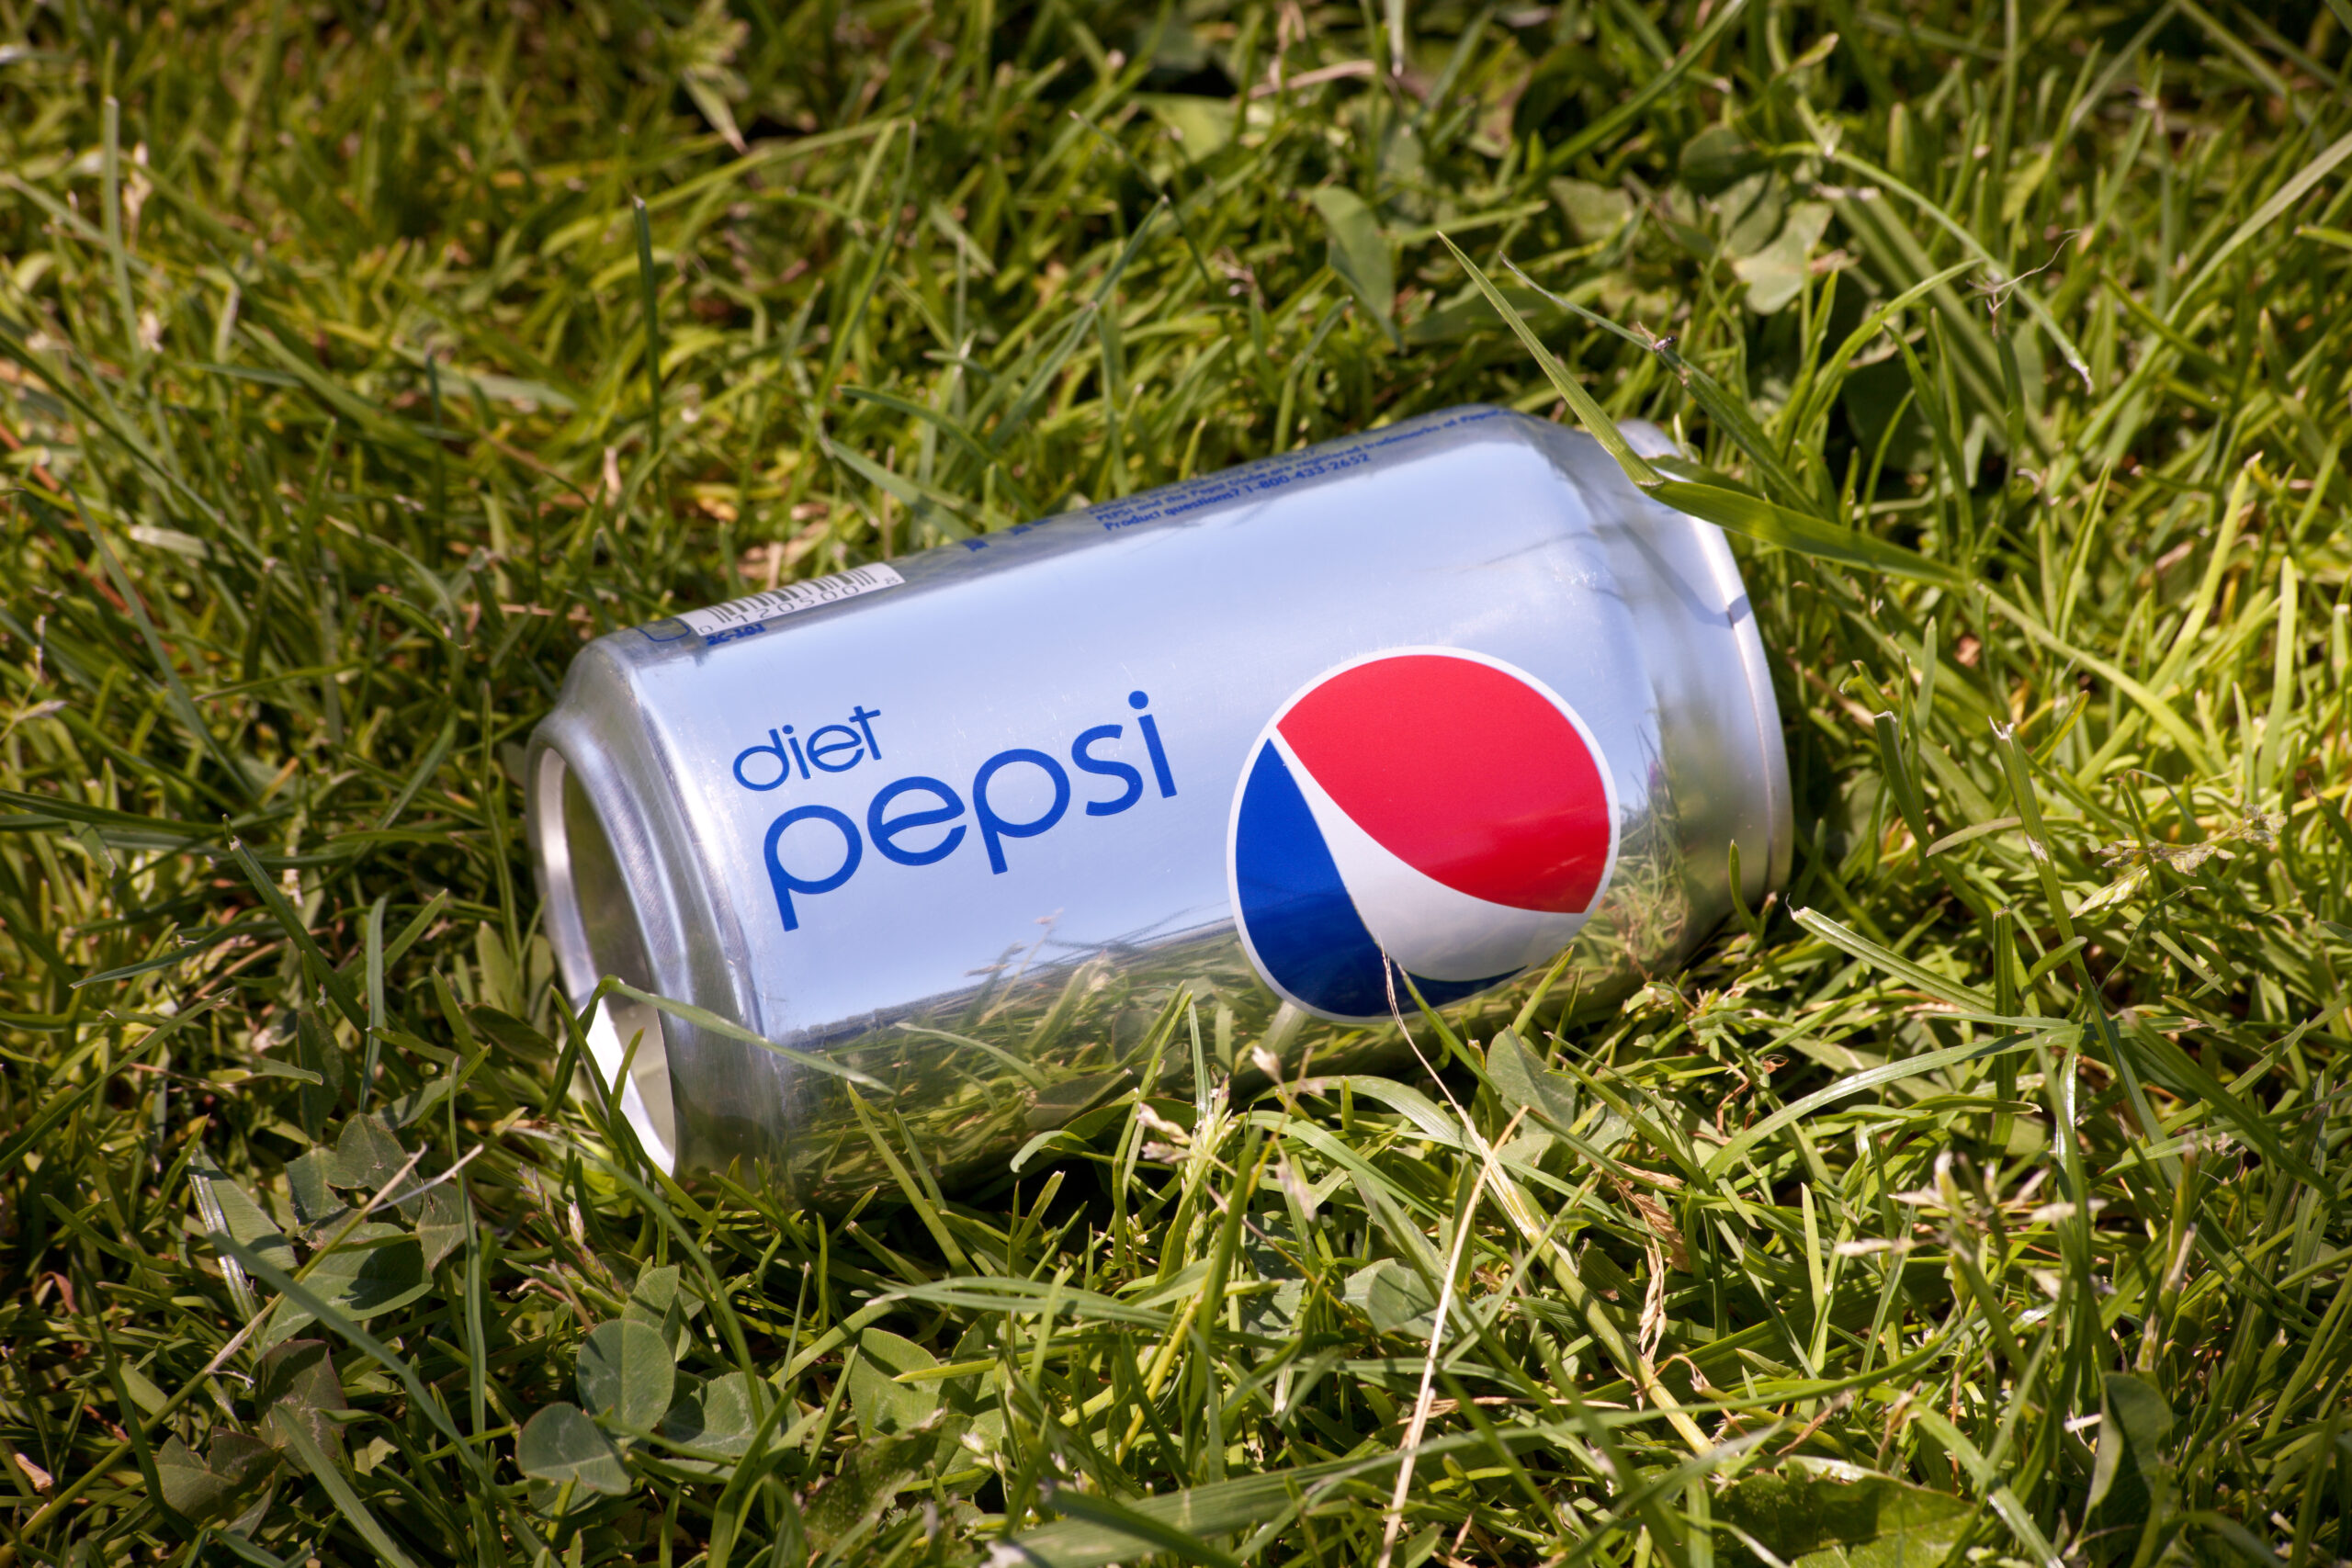 San Jose, California, USA - June 25, 2011: An outdoor product shot of a can of Diet Pepsi laying in grass. Diet Pepsi is a no-calorie soda produced by PepsiCo, Inc., introduced in 1964 as a sugar-free alternative to Pepsi-Cola.